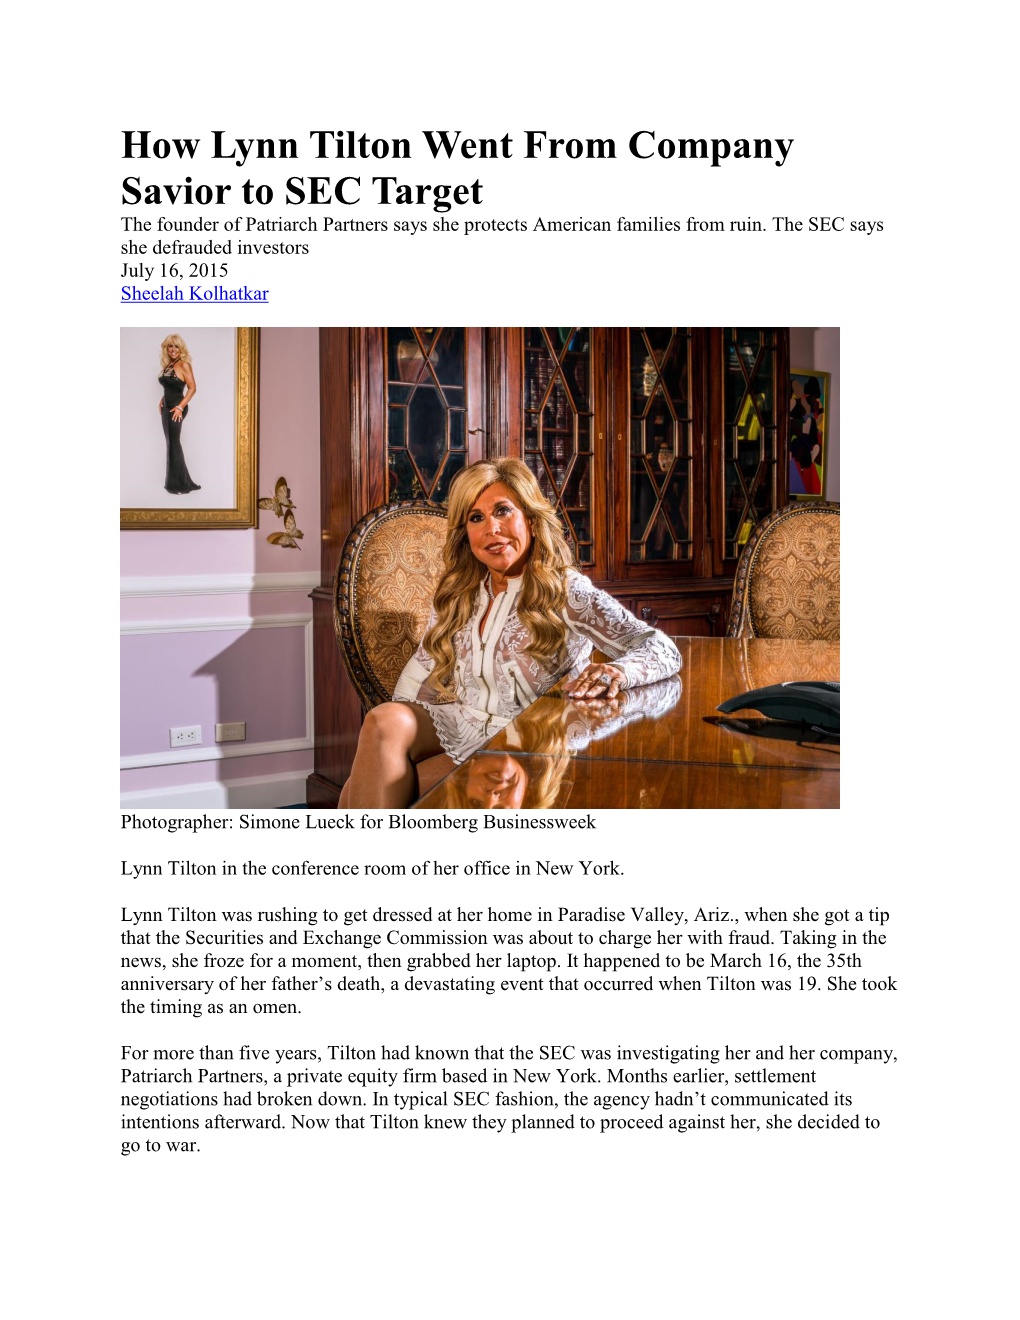 How Lynn Tilton Went from Company Savior to SEC Target the Founder of Patriarch Partners Says She Protects American Families from Ruin